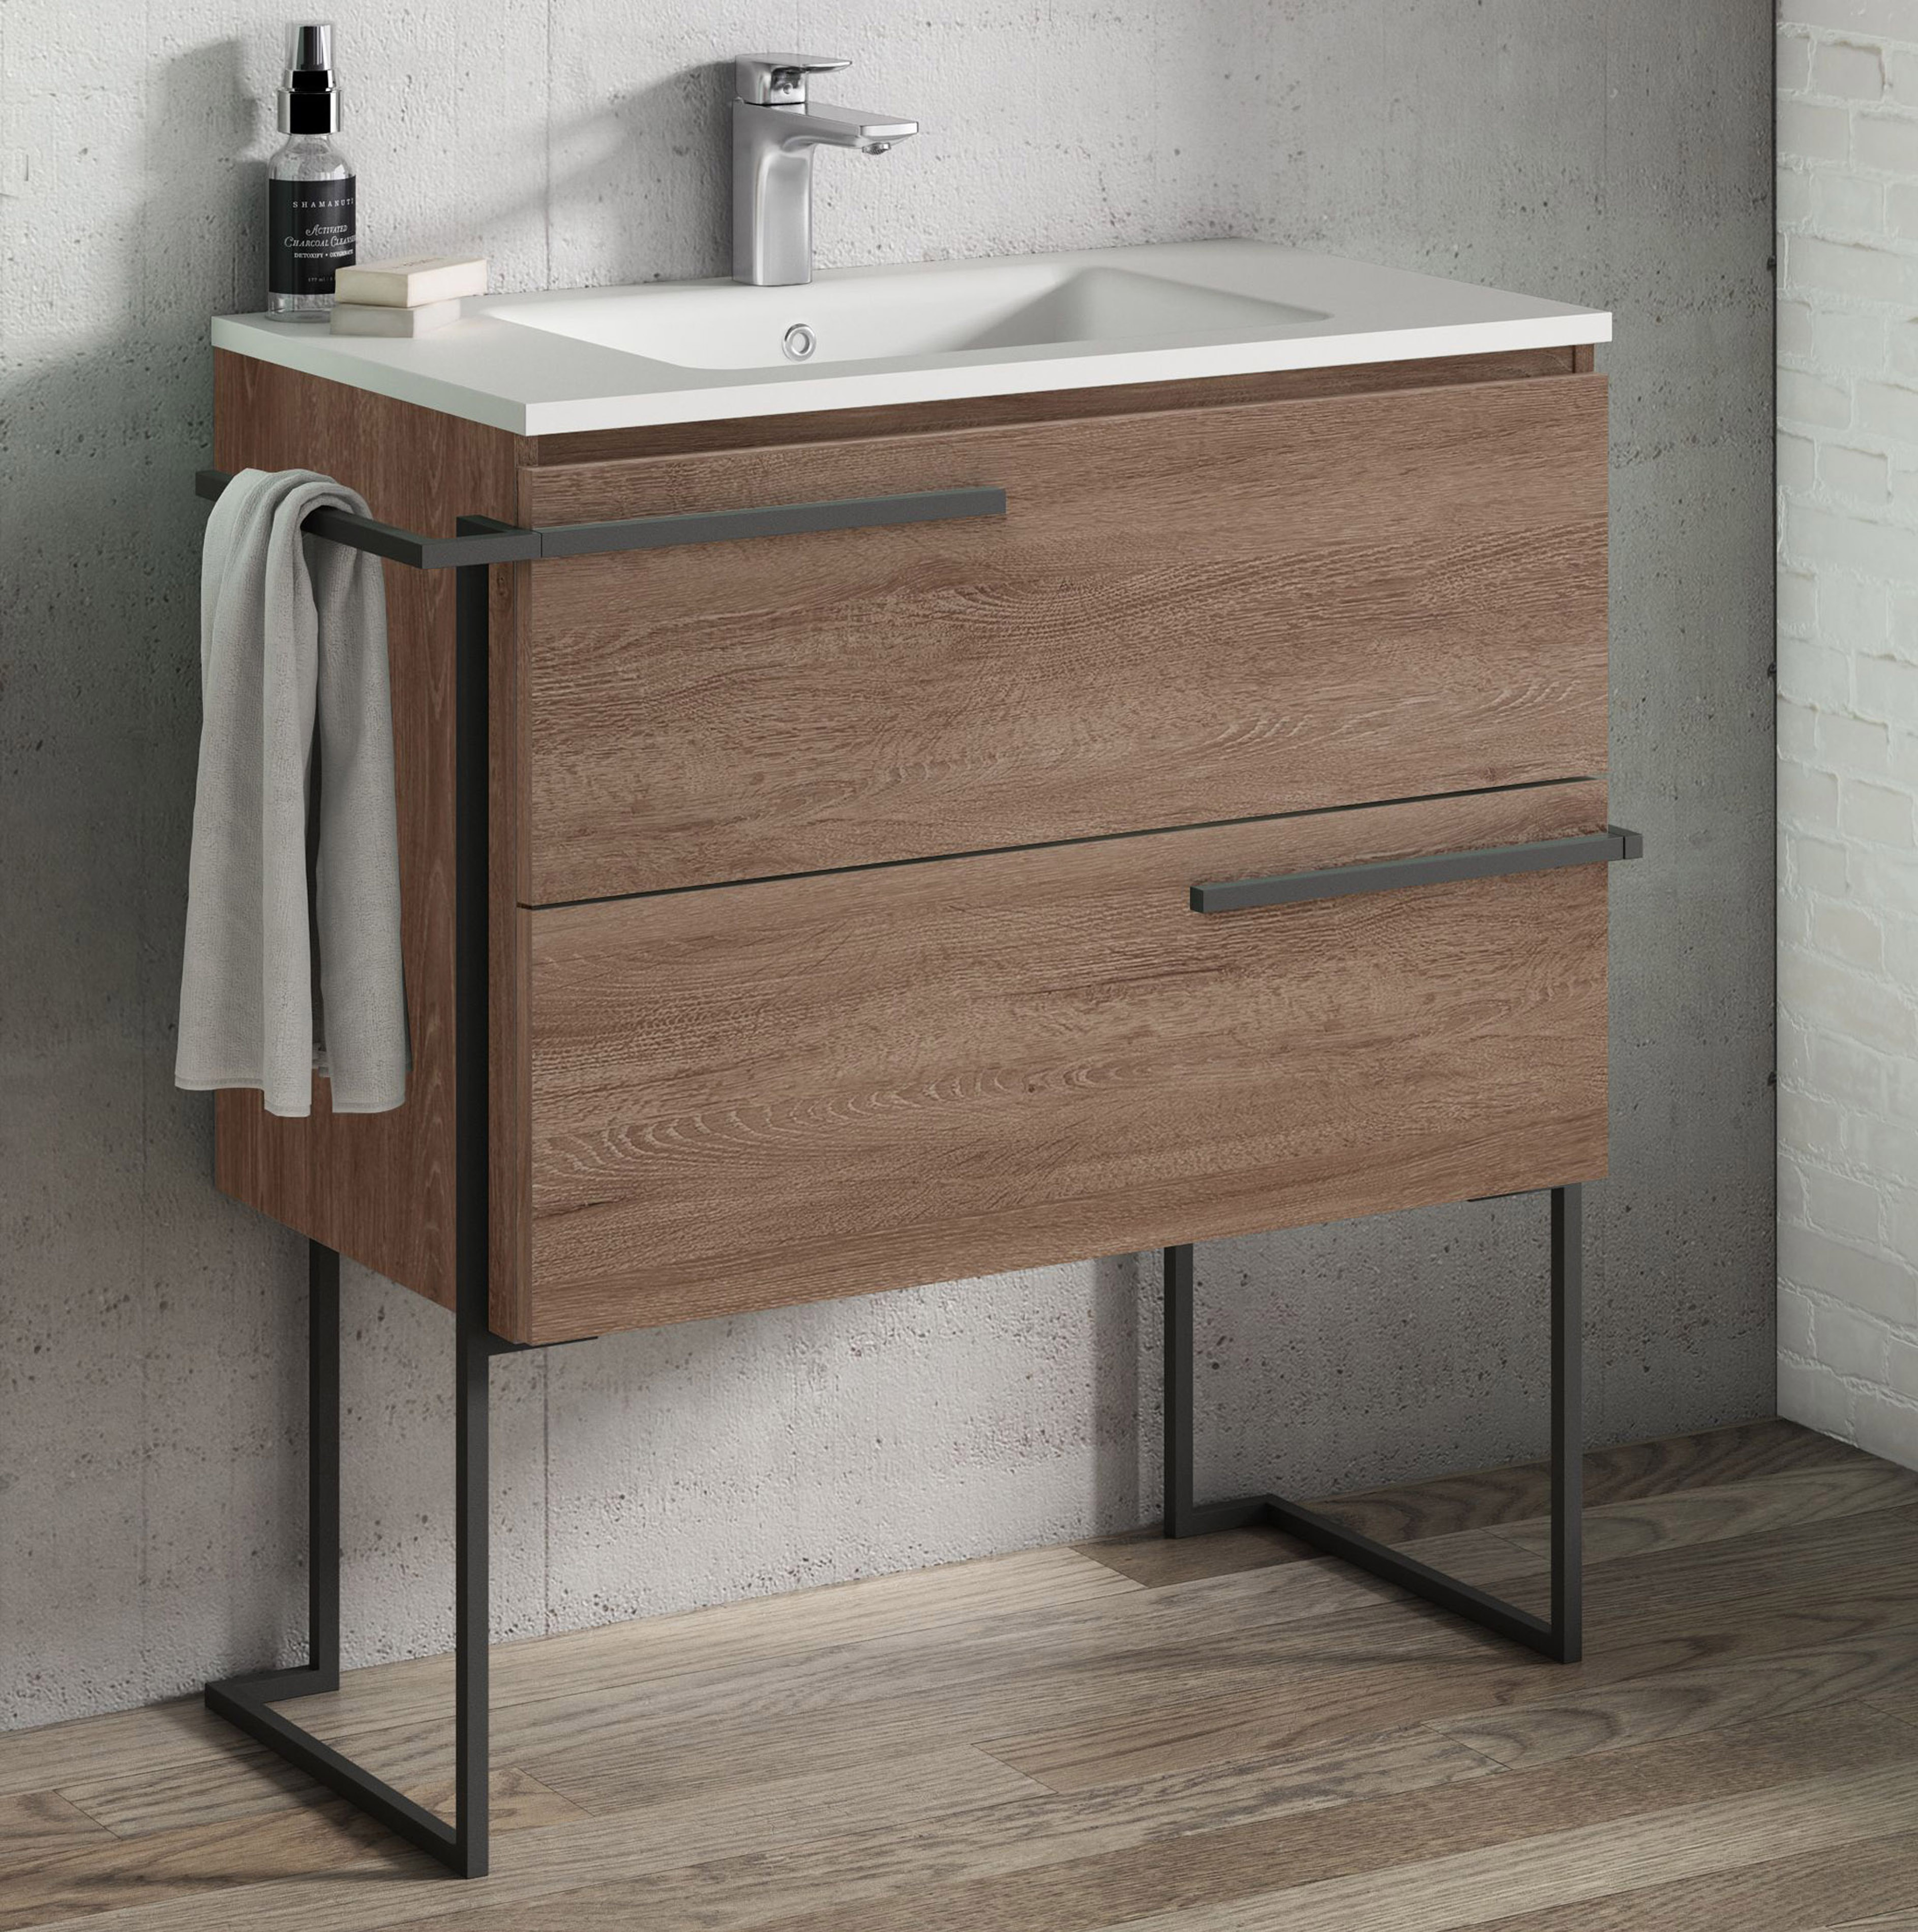 32" Single Sink Vanity 2 Drawer, Ceramic Sink with Metal Legs and Towel Bar with 4 Color Options